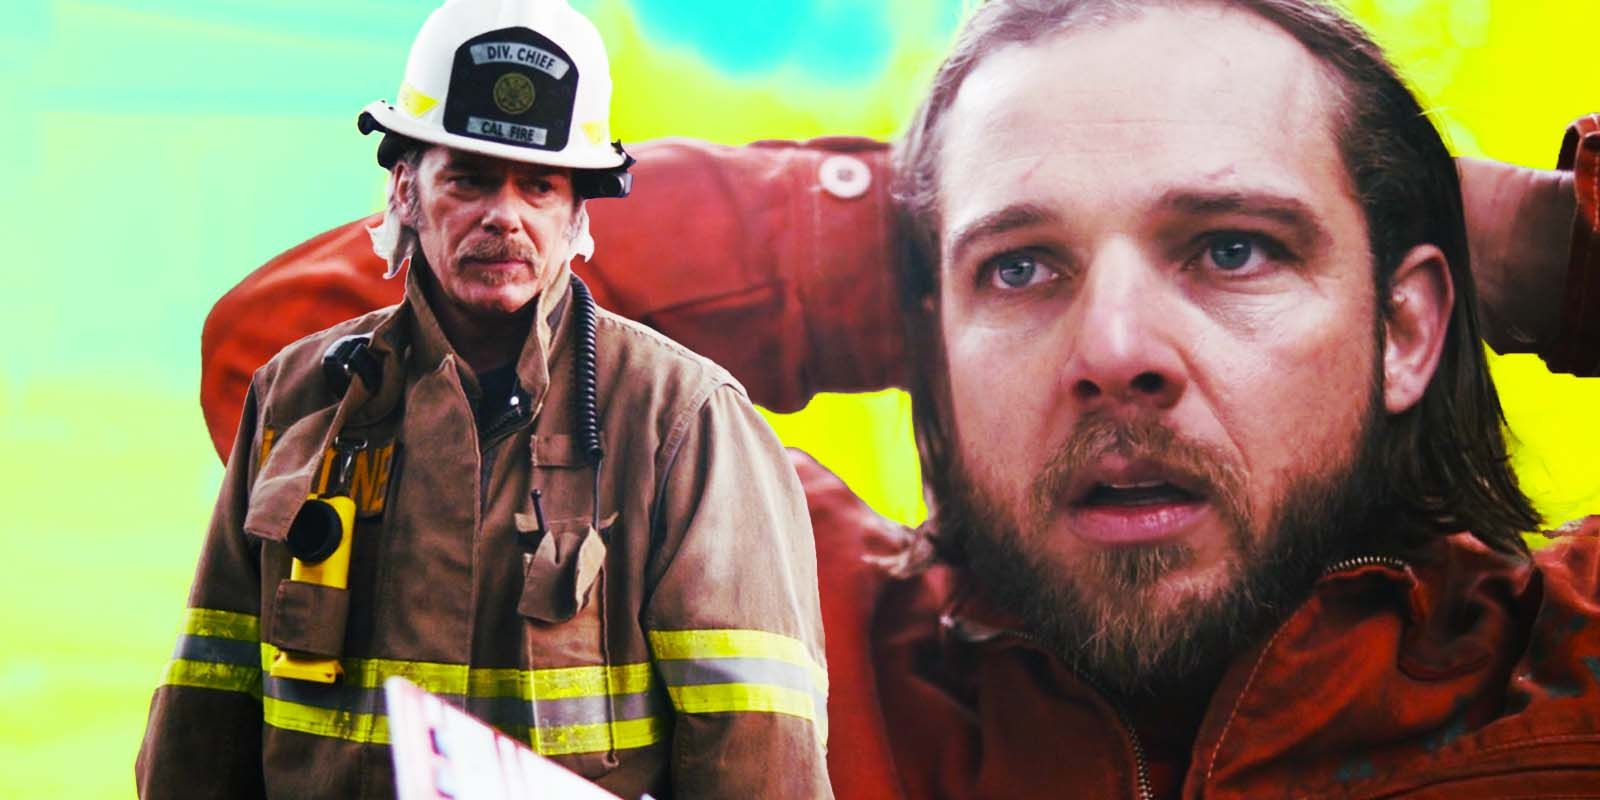 Billy Burke as Vince Leone and Max Thieriot as Bode Leone in Fire Country season 2, episode 4